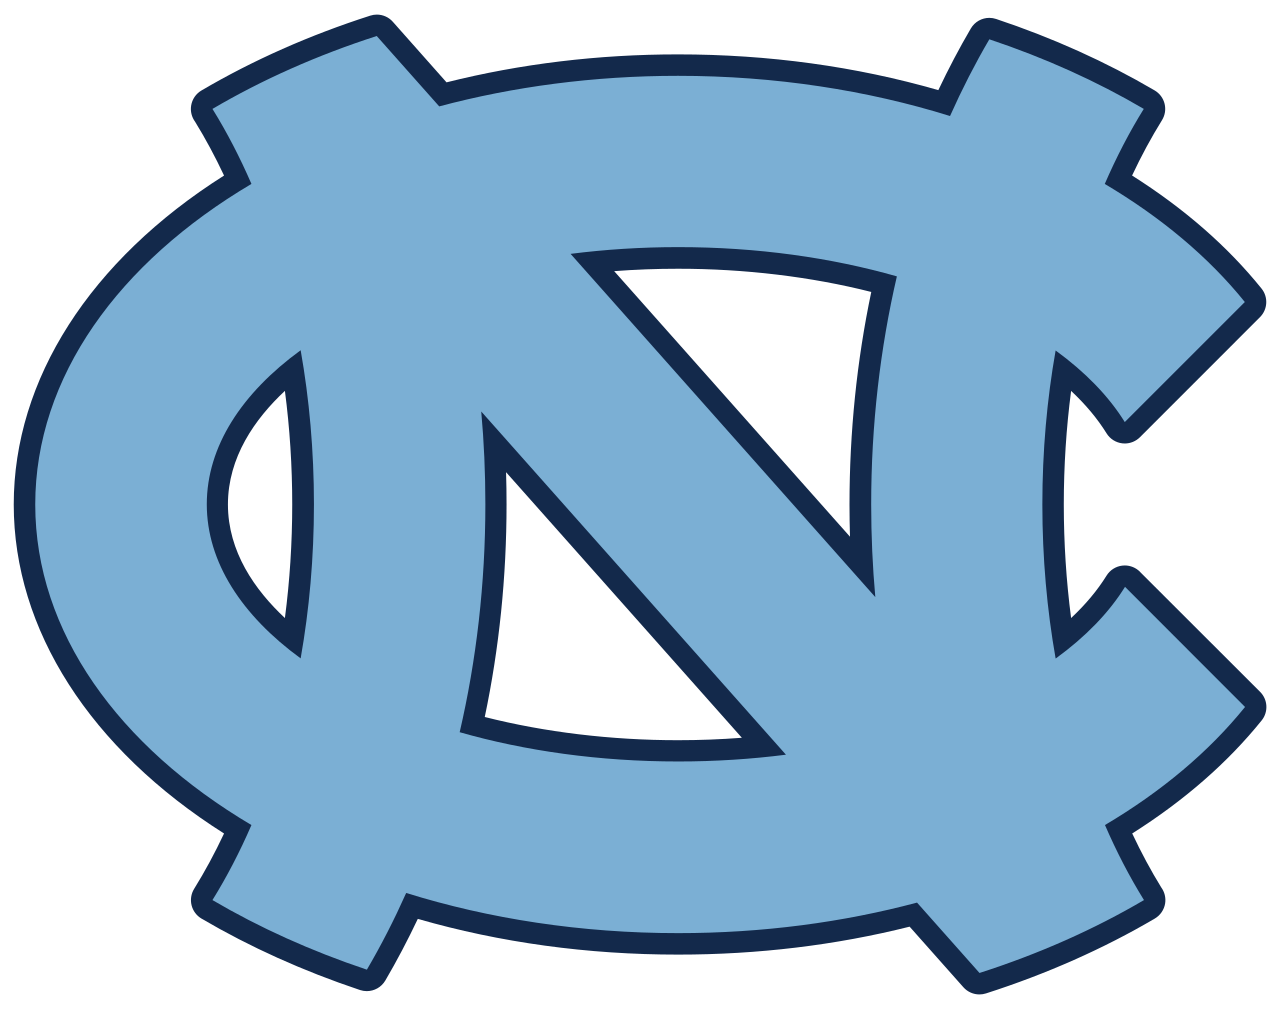 UNC AND IMG LEARFIELD TICKET SOLUTIONS A WINNING COMBINATION